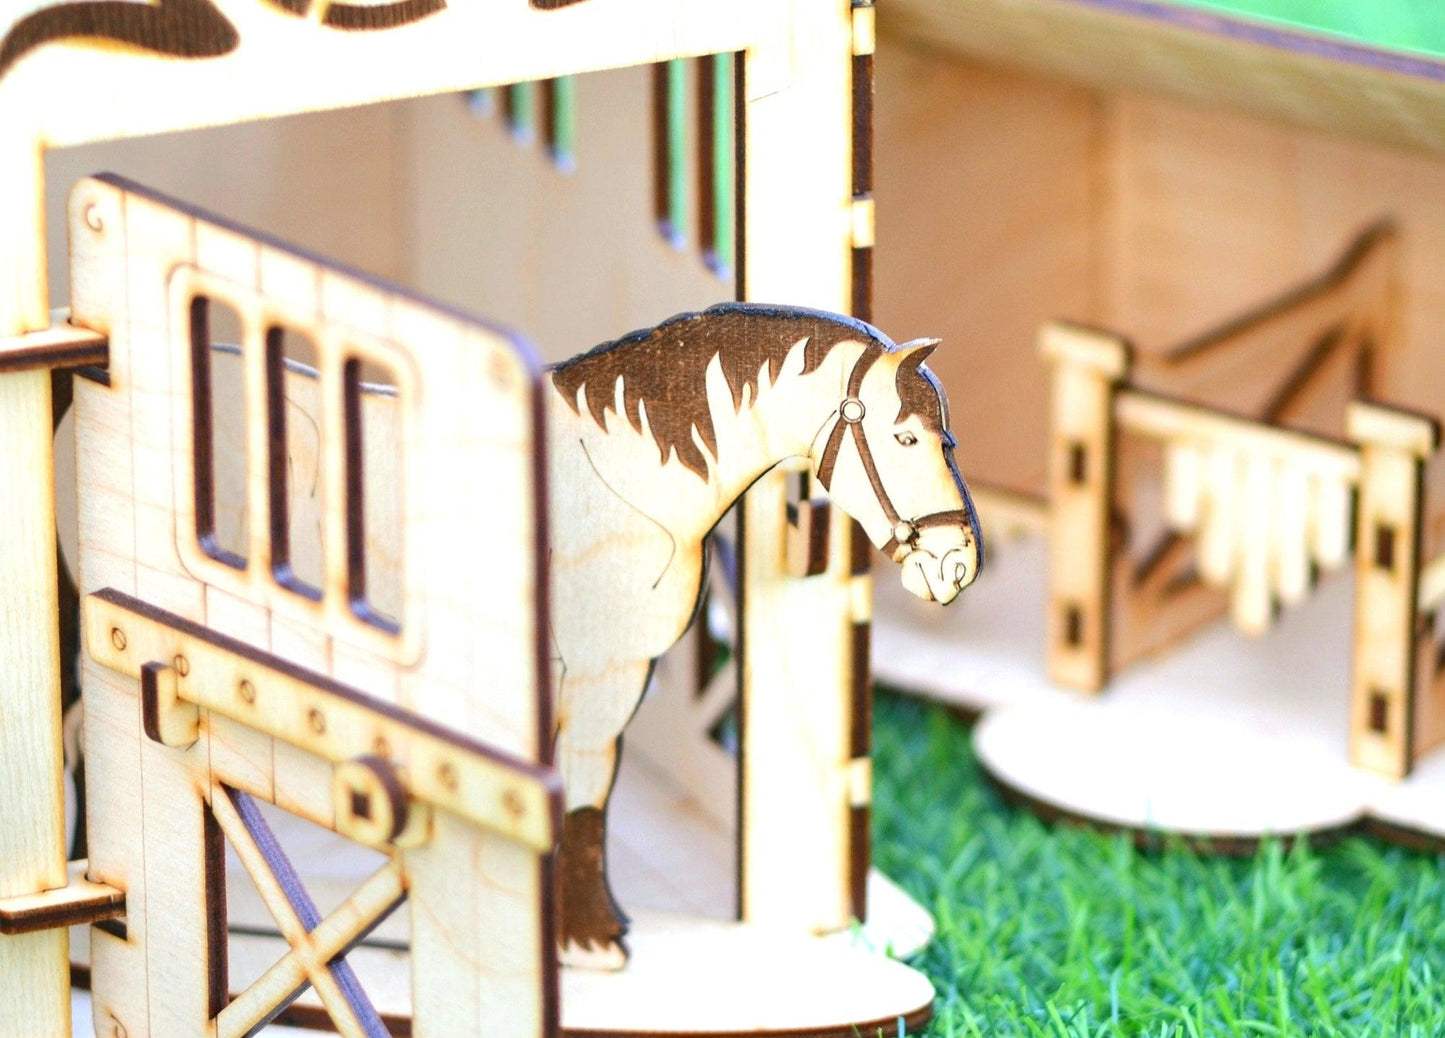 DIY Wooden Farm House Miniature With Horse Cart - Wooden Puzzles - Crafts Kit - Rajbharti Crafts